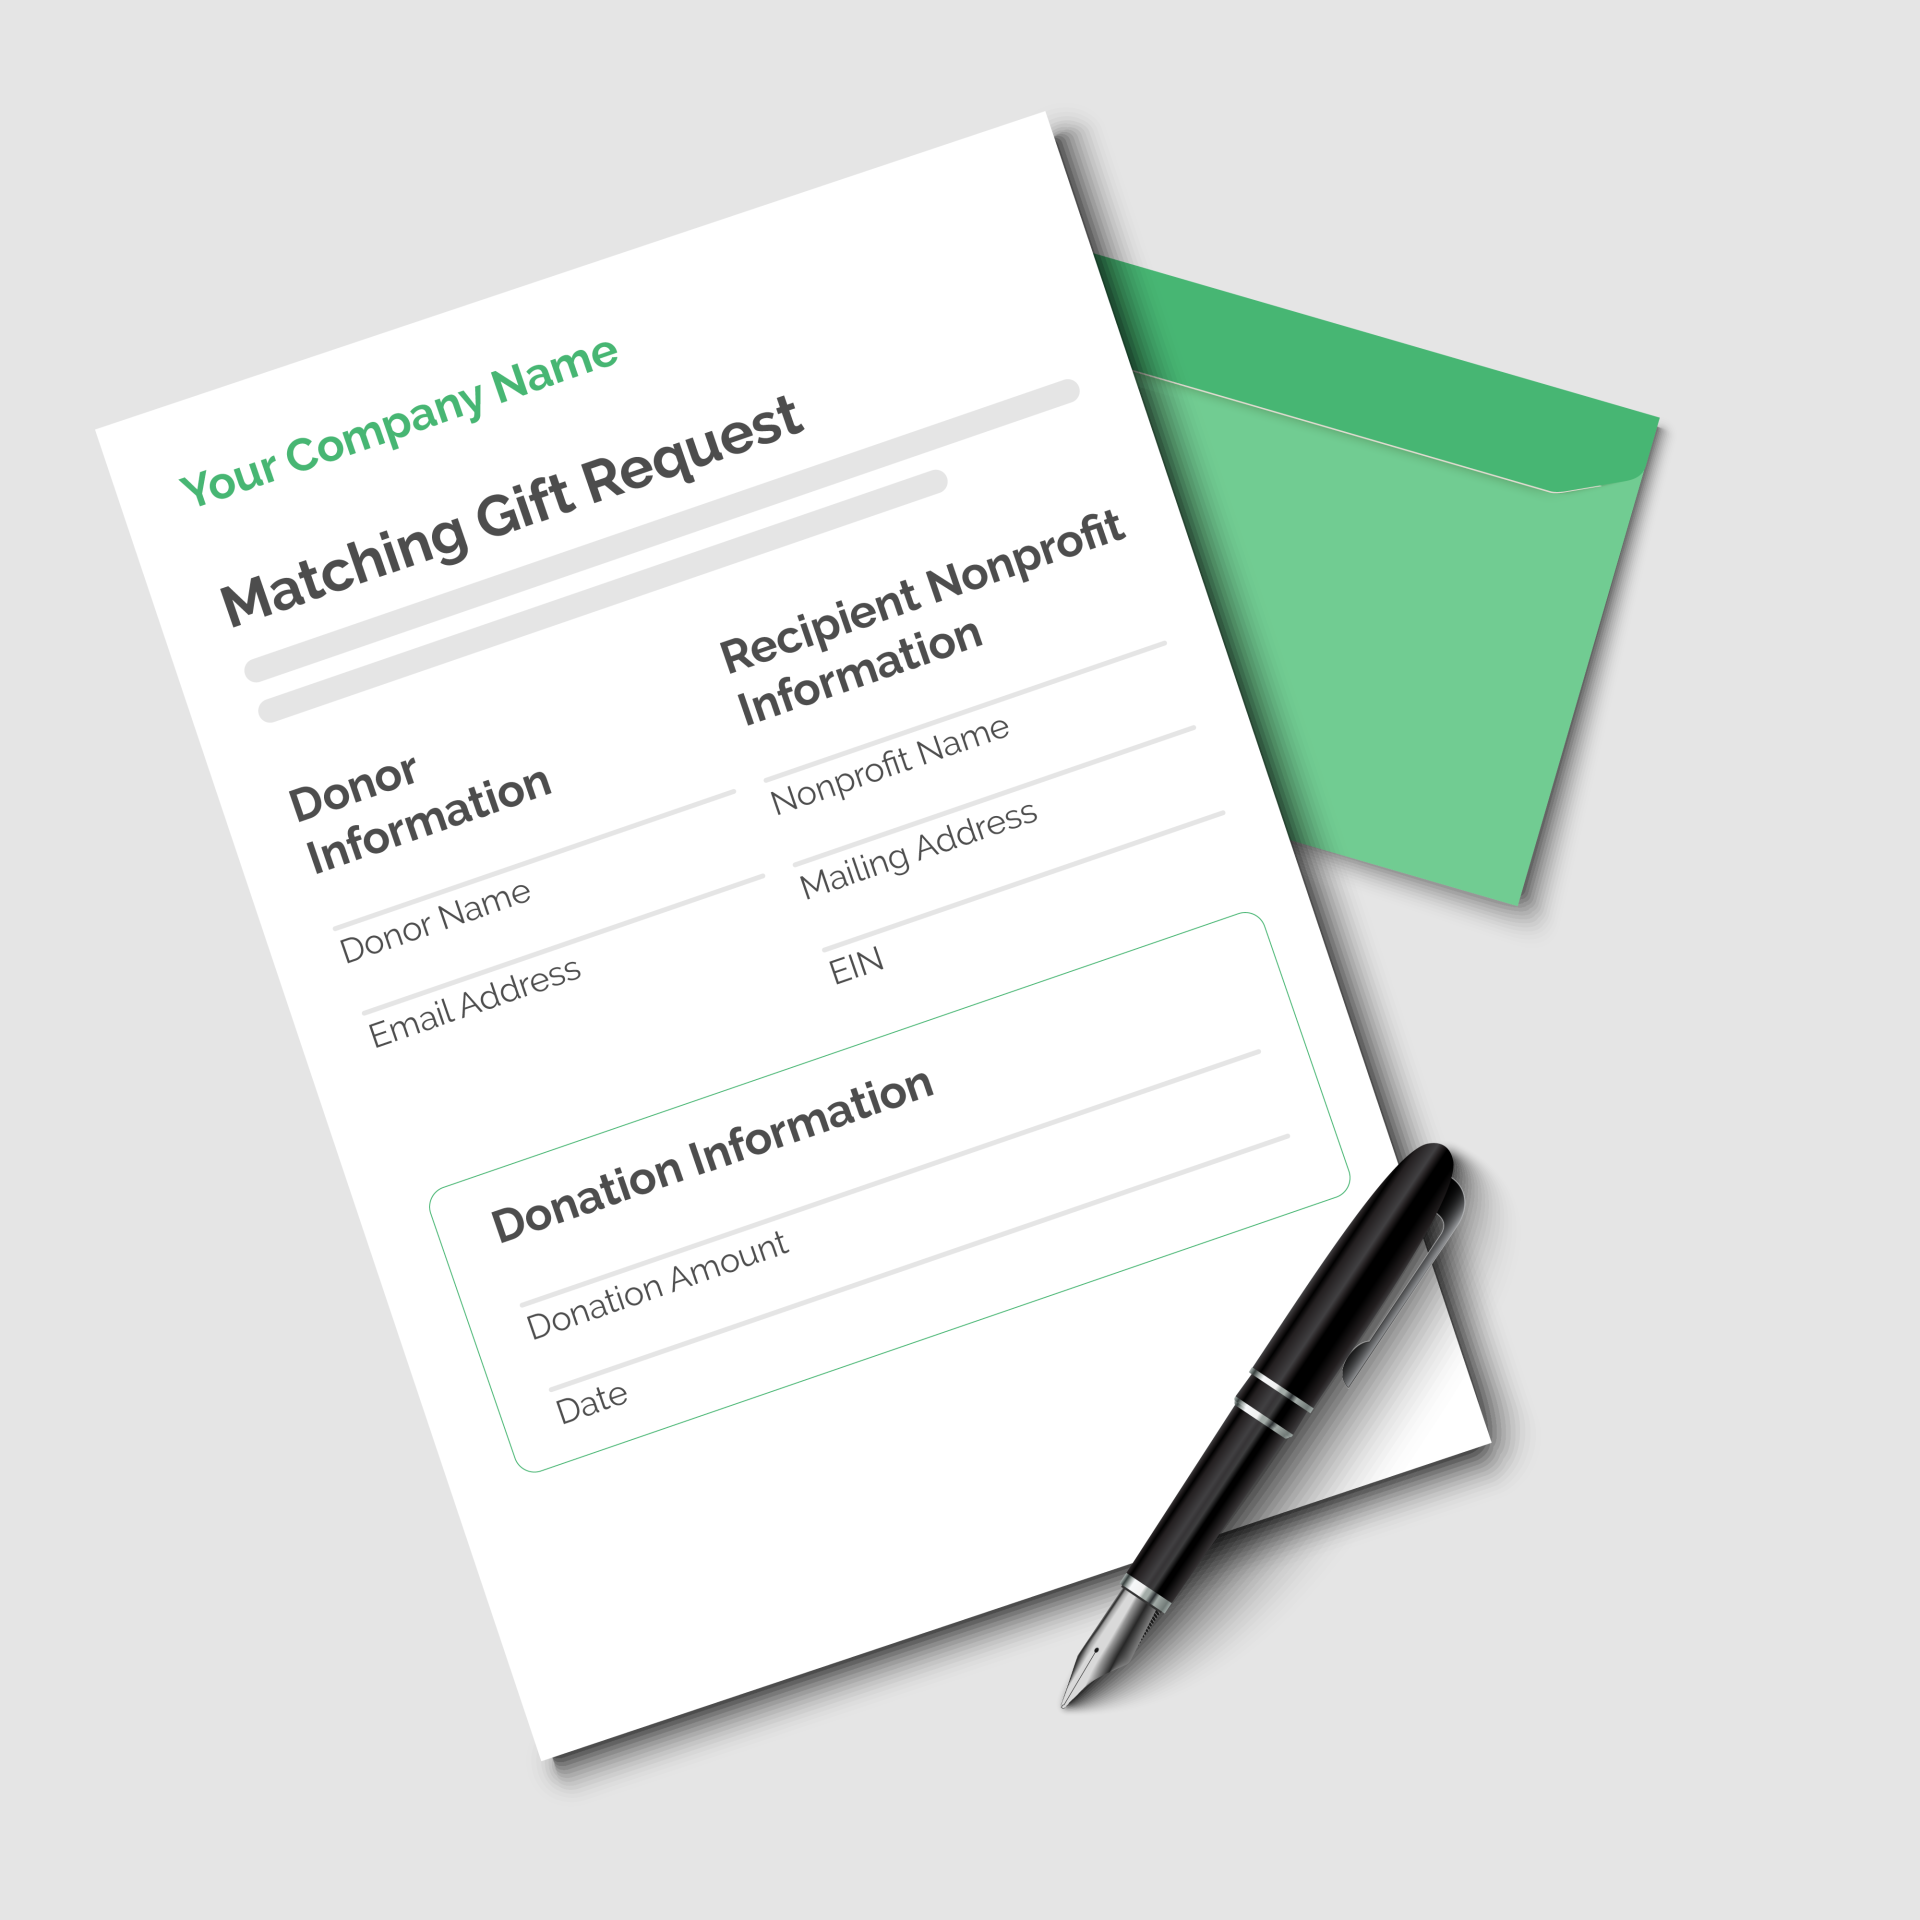 Corporate Matching Gift Forms